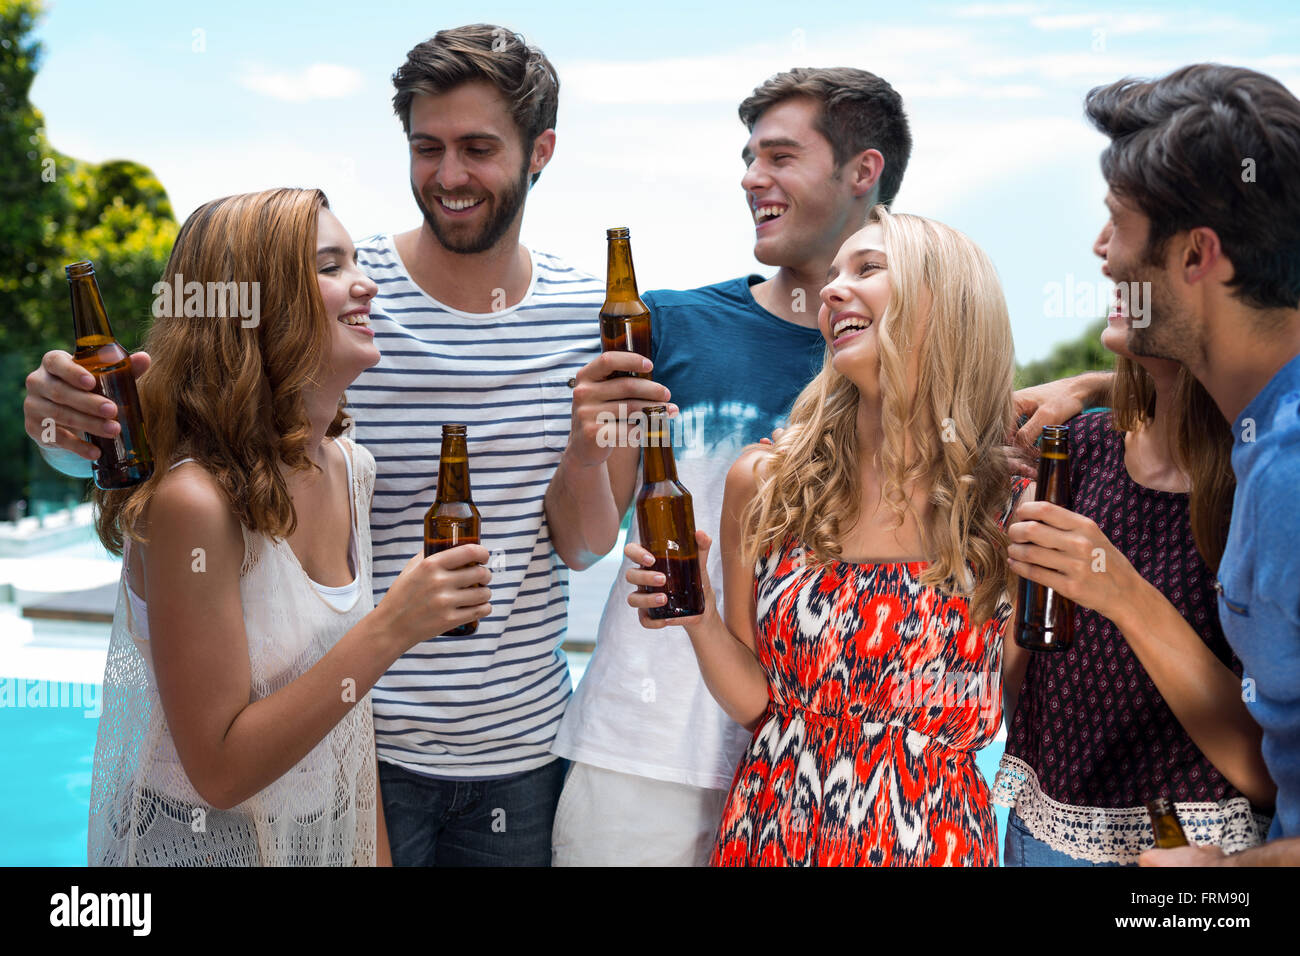 Group of happy friend holding beer bottles Stock Photo